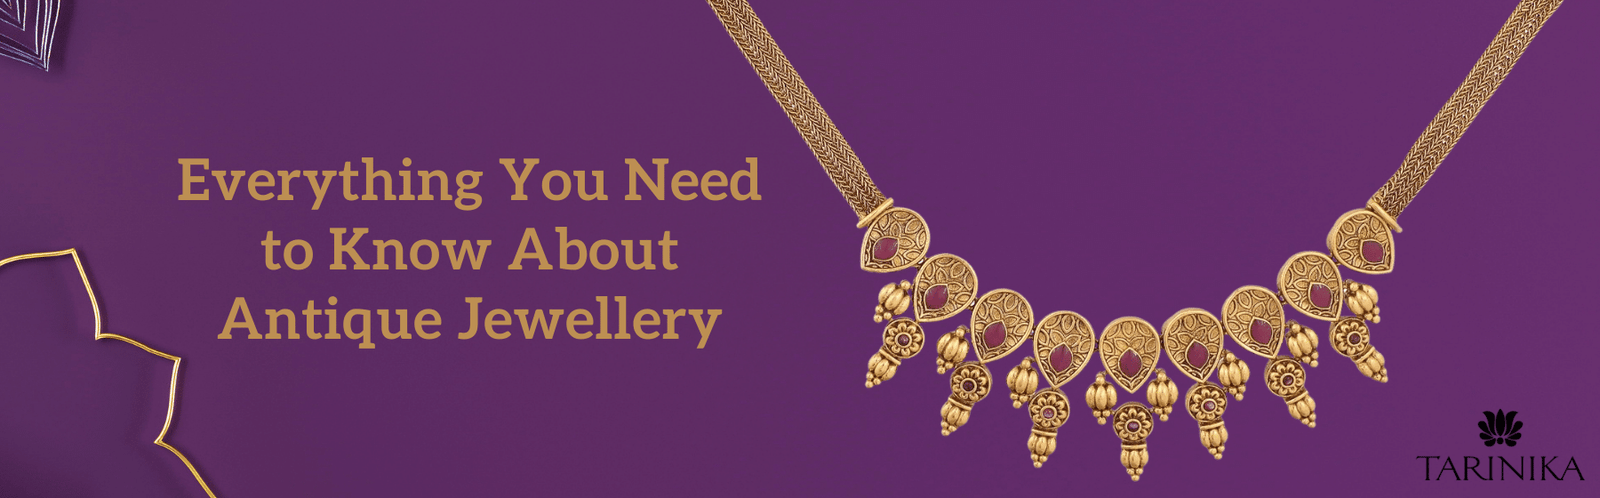 antique jewellery guide